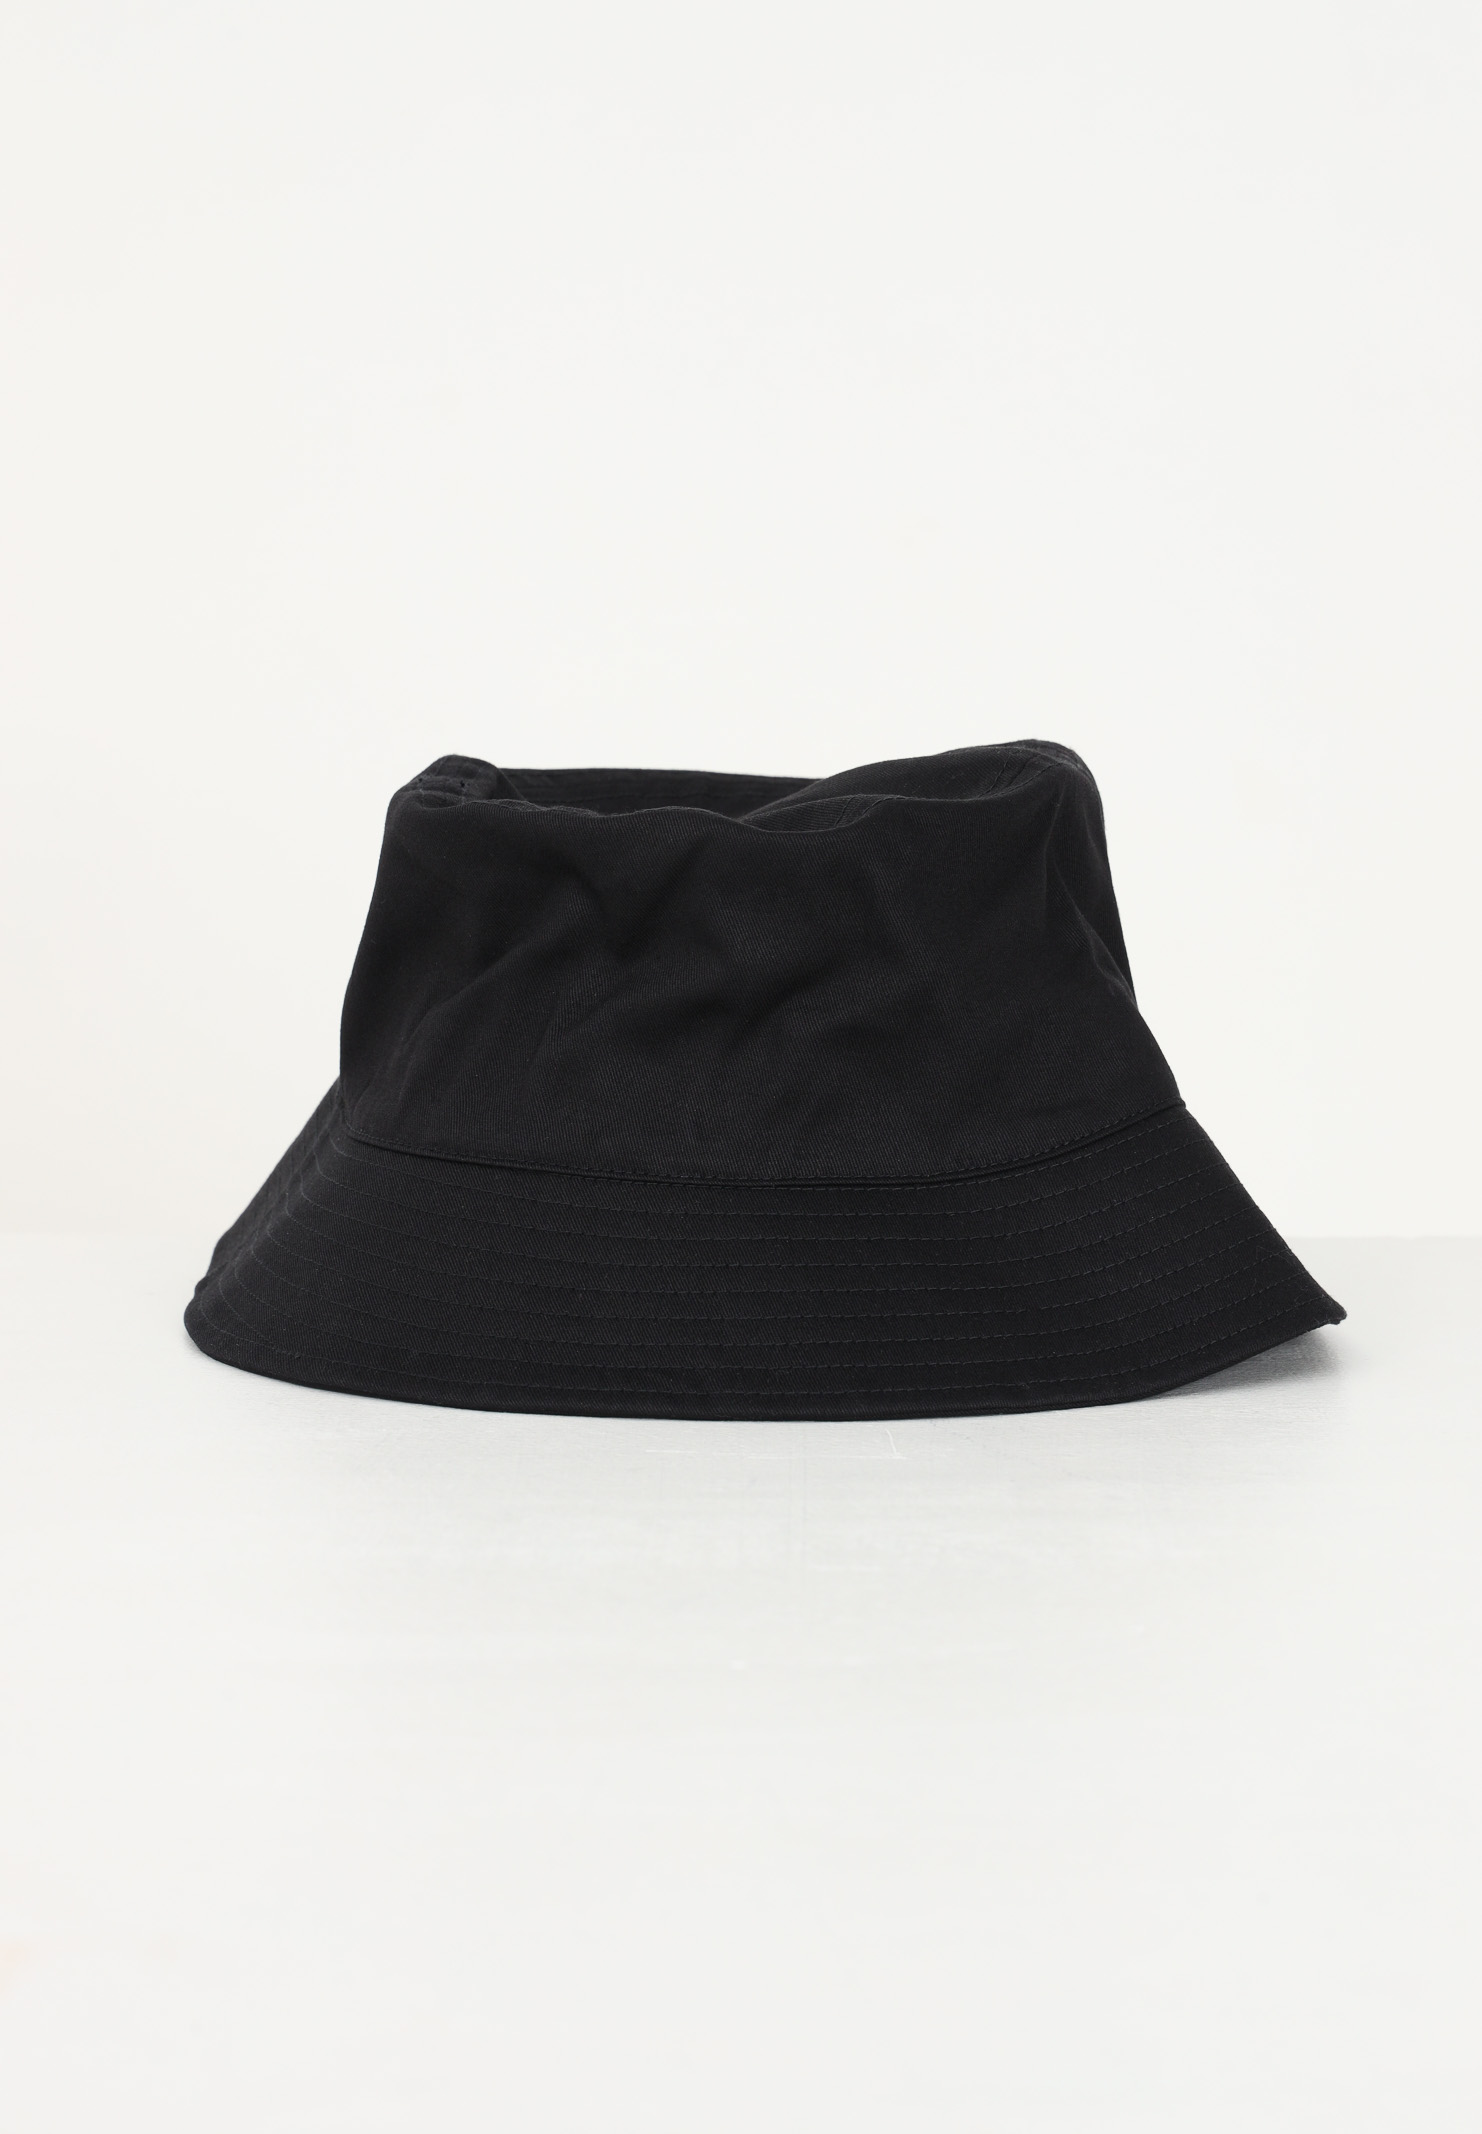 Black bucket for men and women with logo patch - CALVIN KLEIN JEANS -  Pavidas